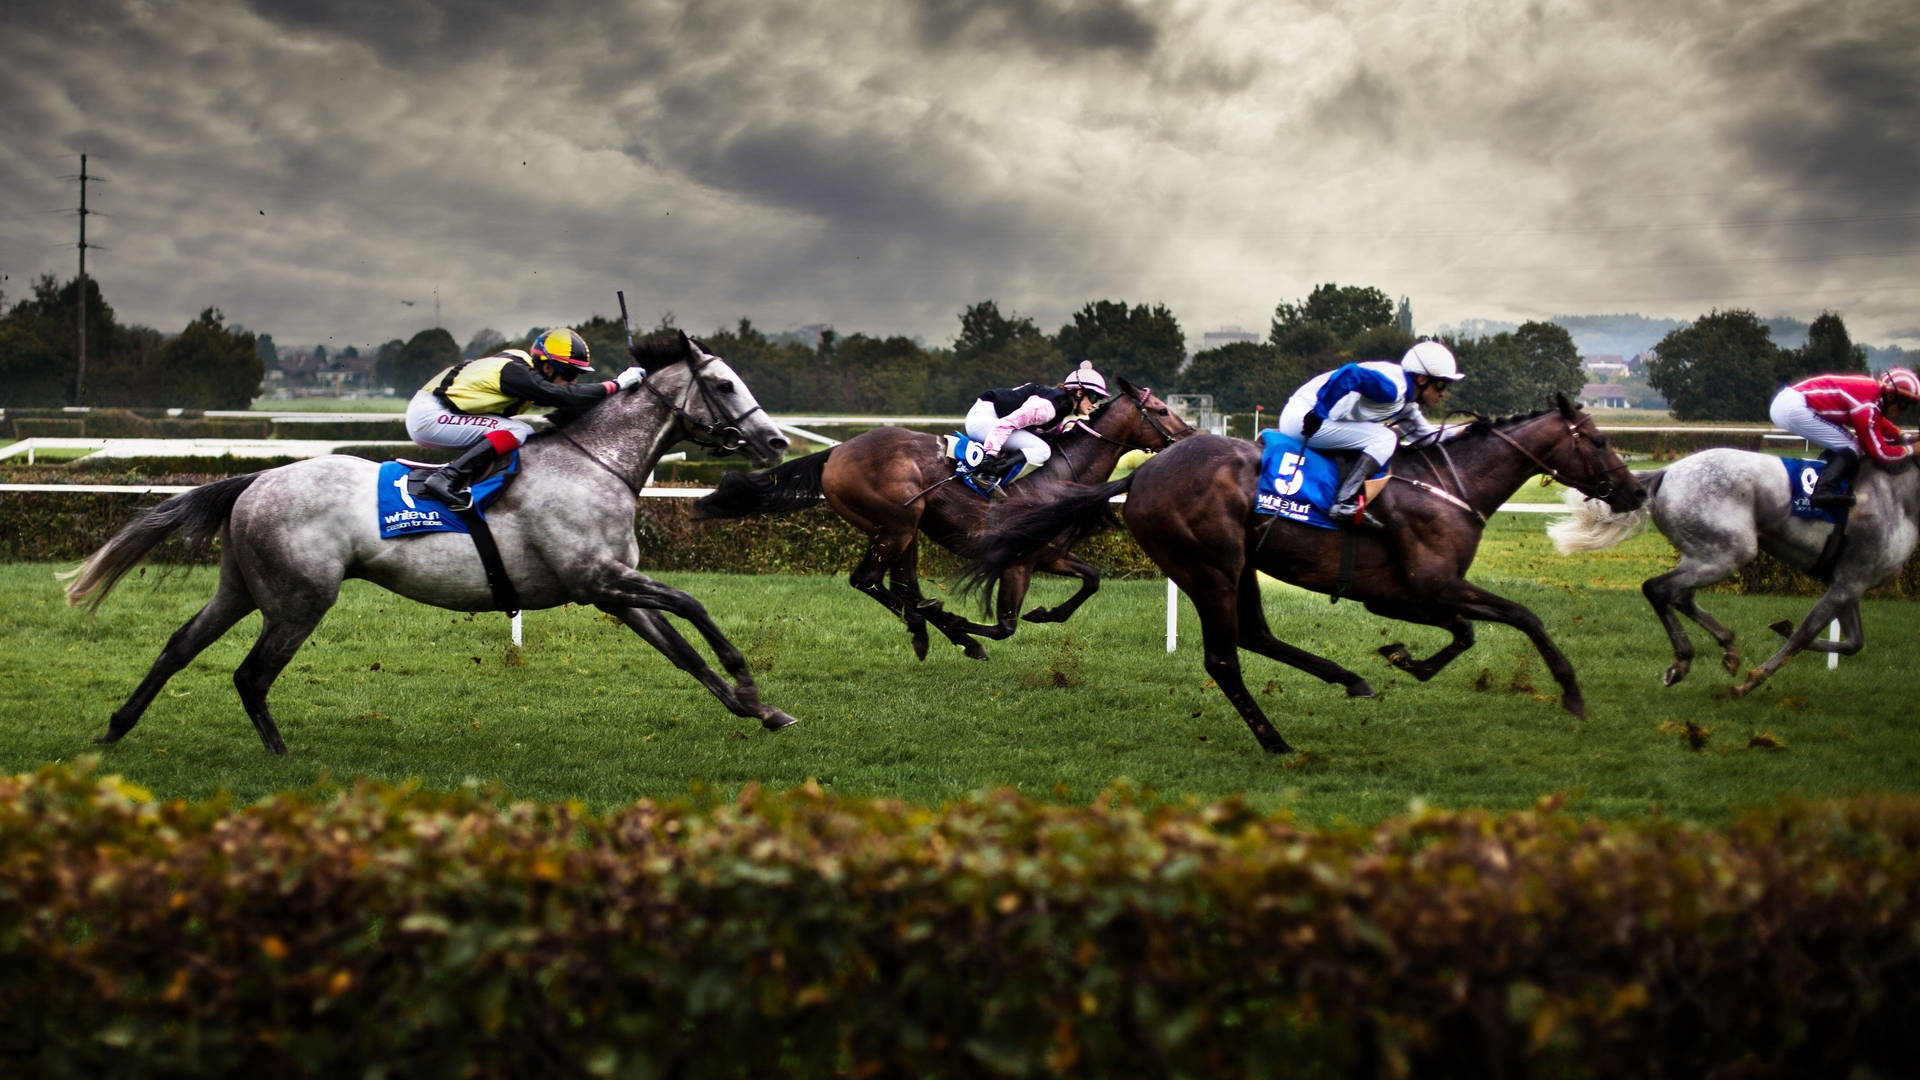 Horse Racing In A Bad Weather Background